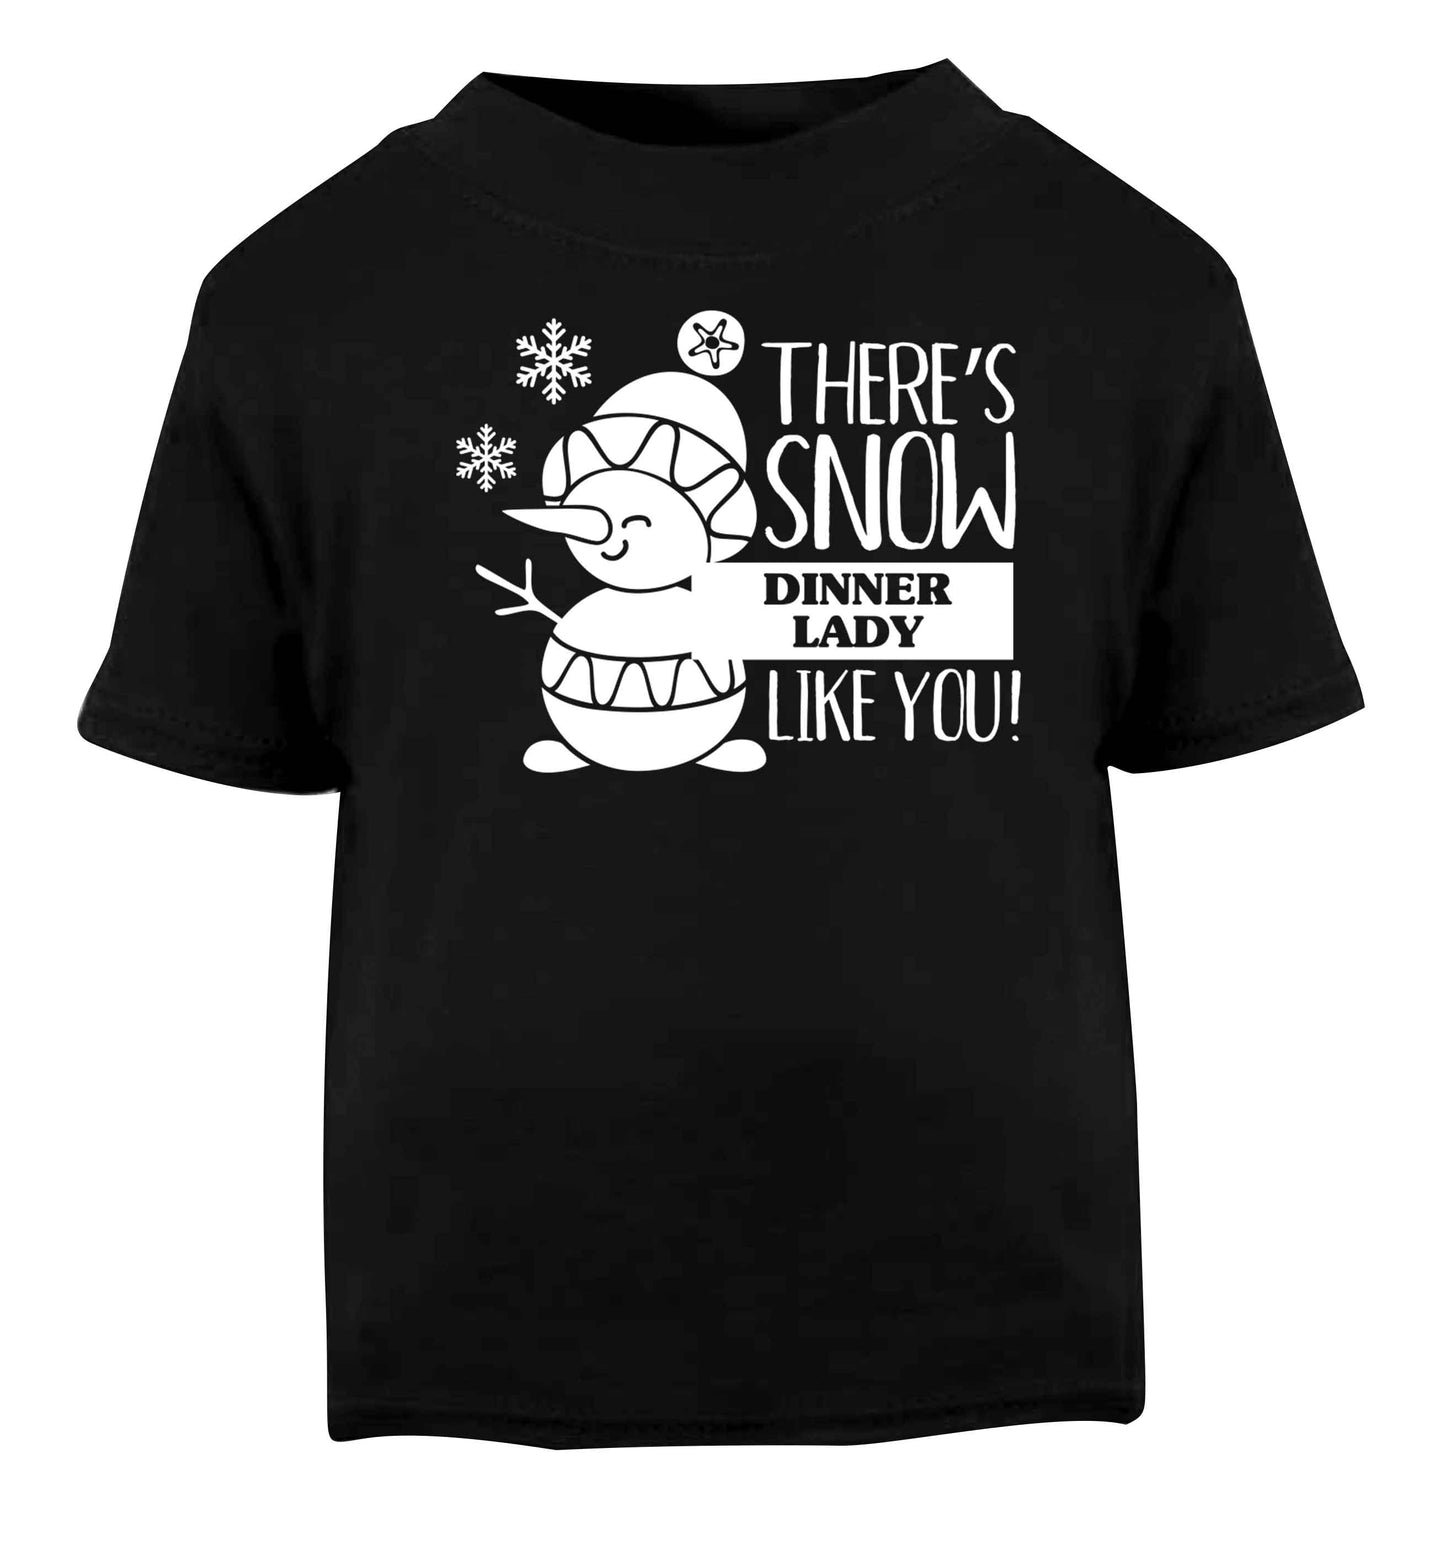 There's snow dinner lady like you Black baby toddler Tshirt 2 years